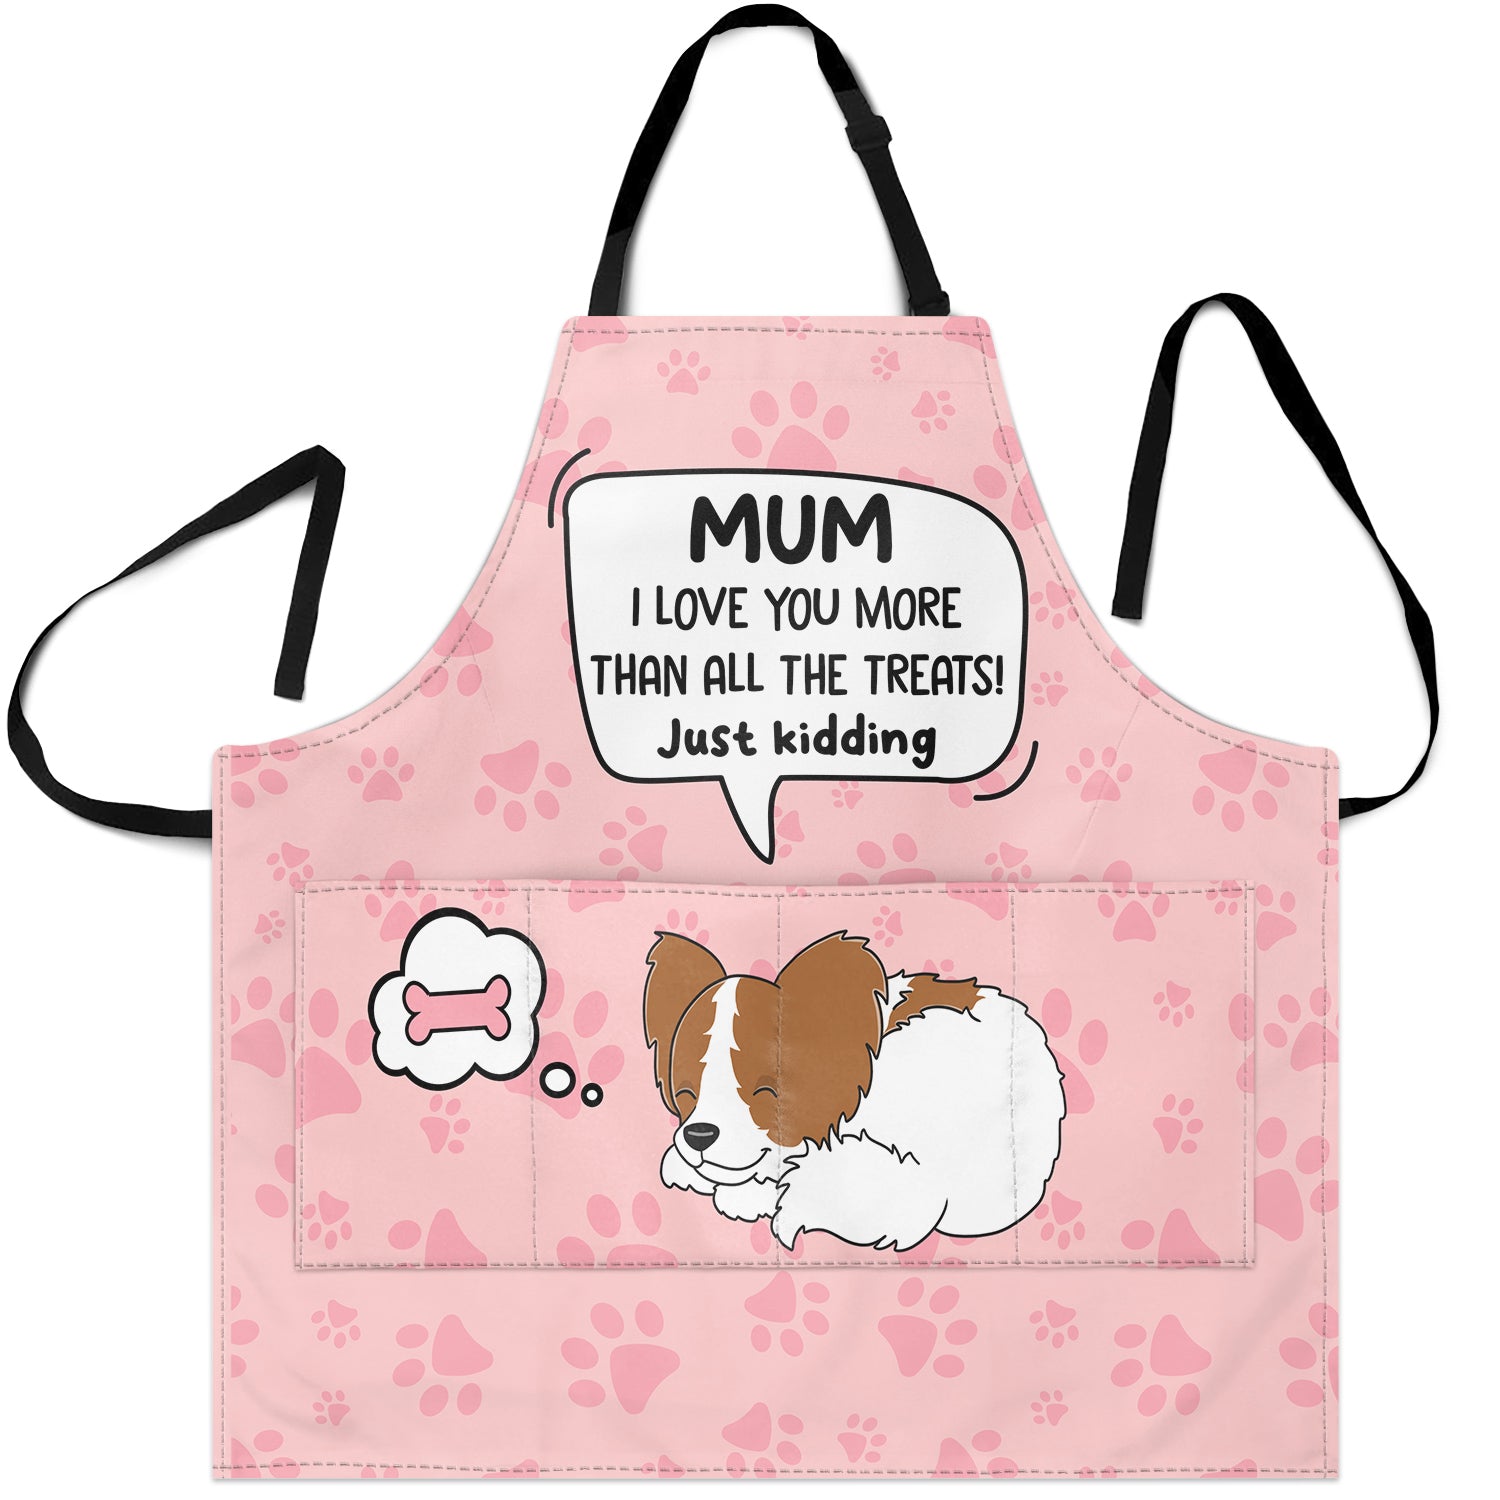 Mom I Love You More Than All The Treats - Birthday, Loving Gift For Dog Lover, Cat Dad, Pet Mum - Personalized Apron